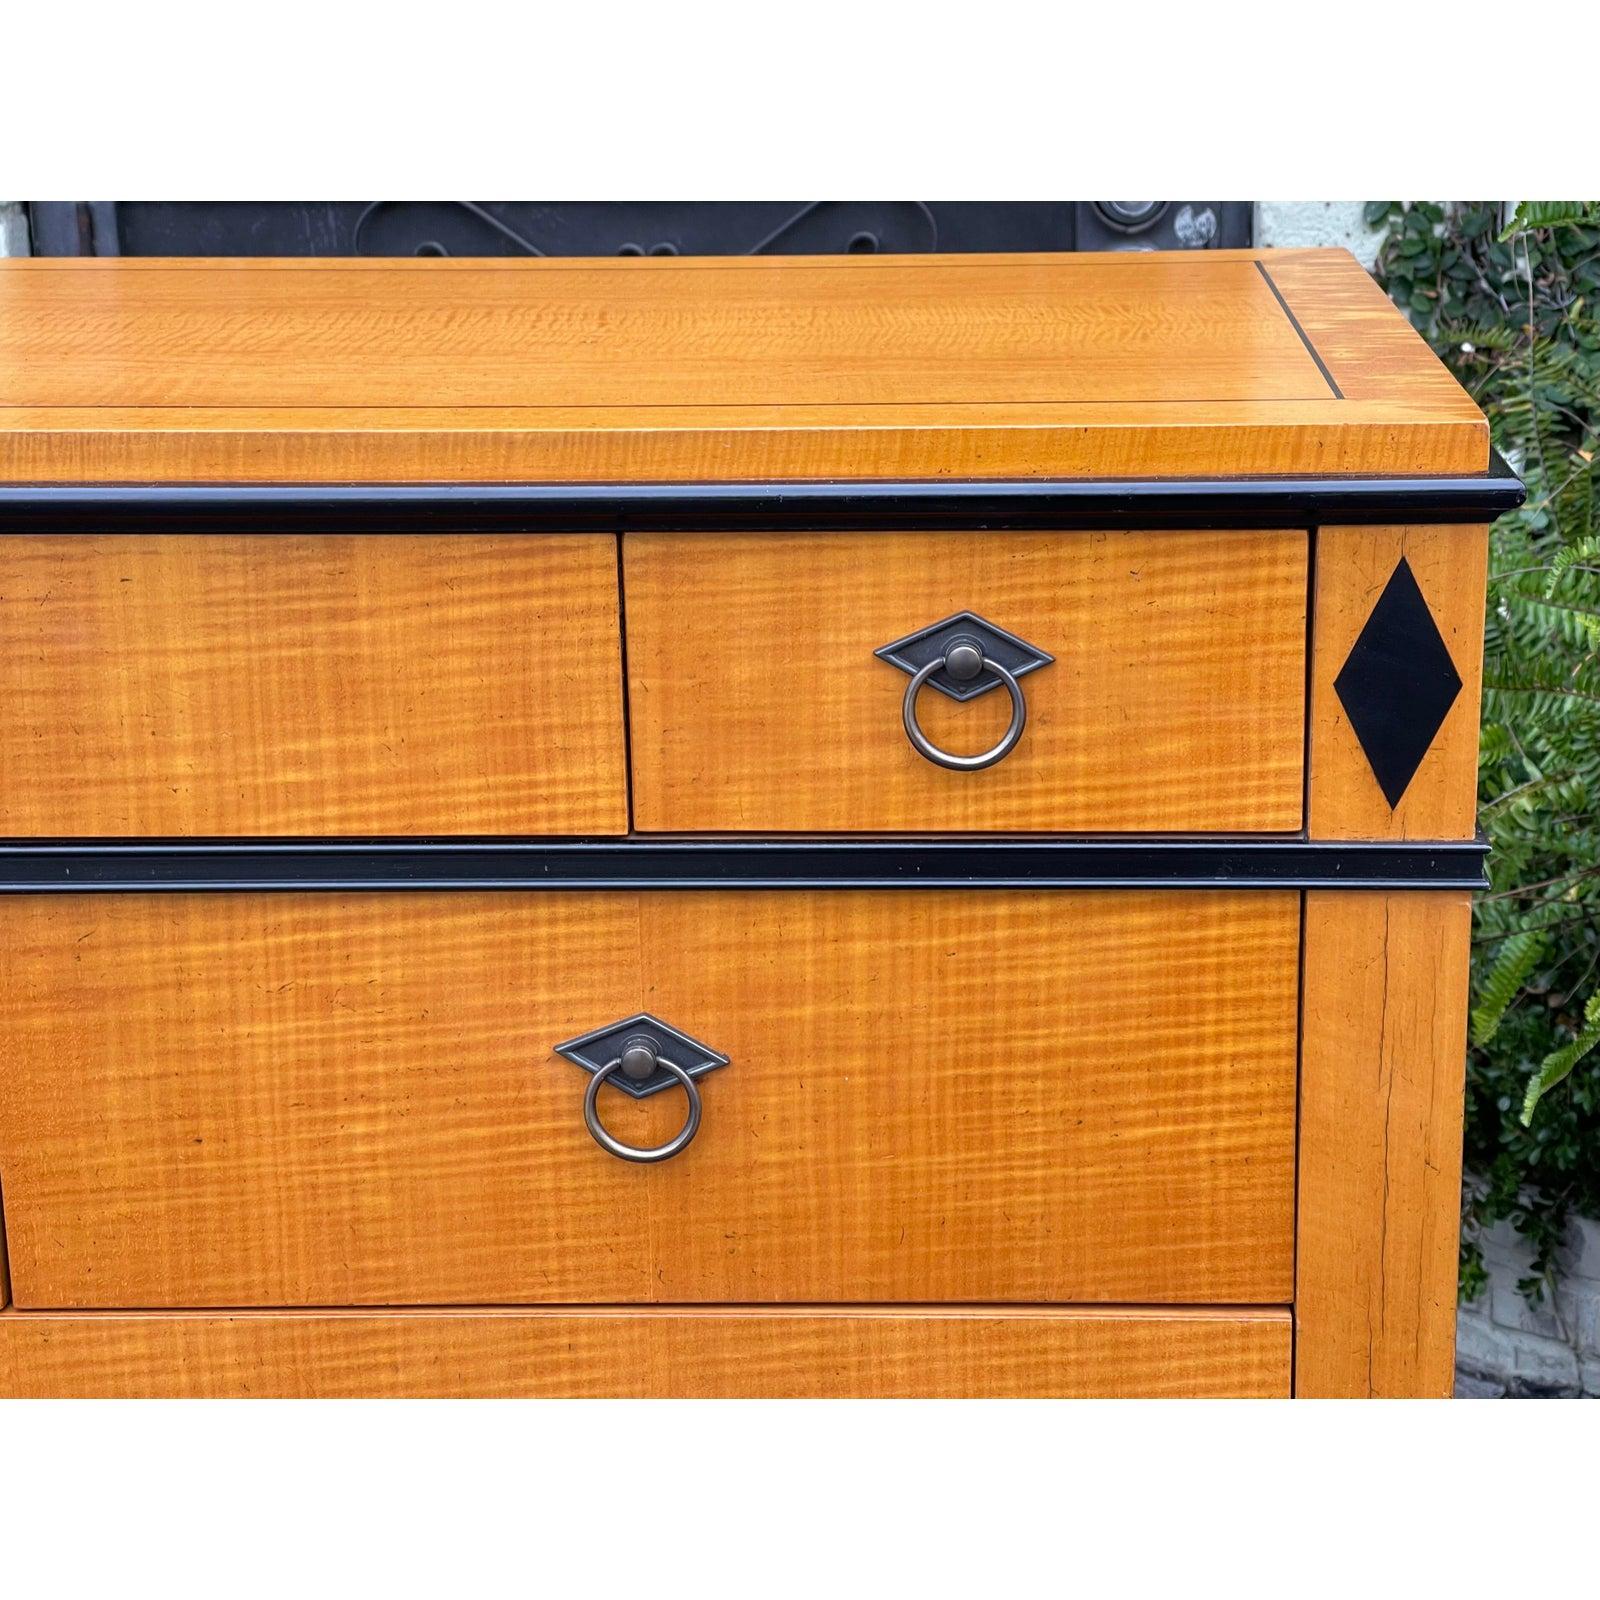 Late 20th Century Biedermeier Style Baker Furniture Company Tiger Maple Commode Chest of Drawers